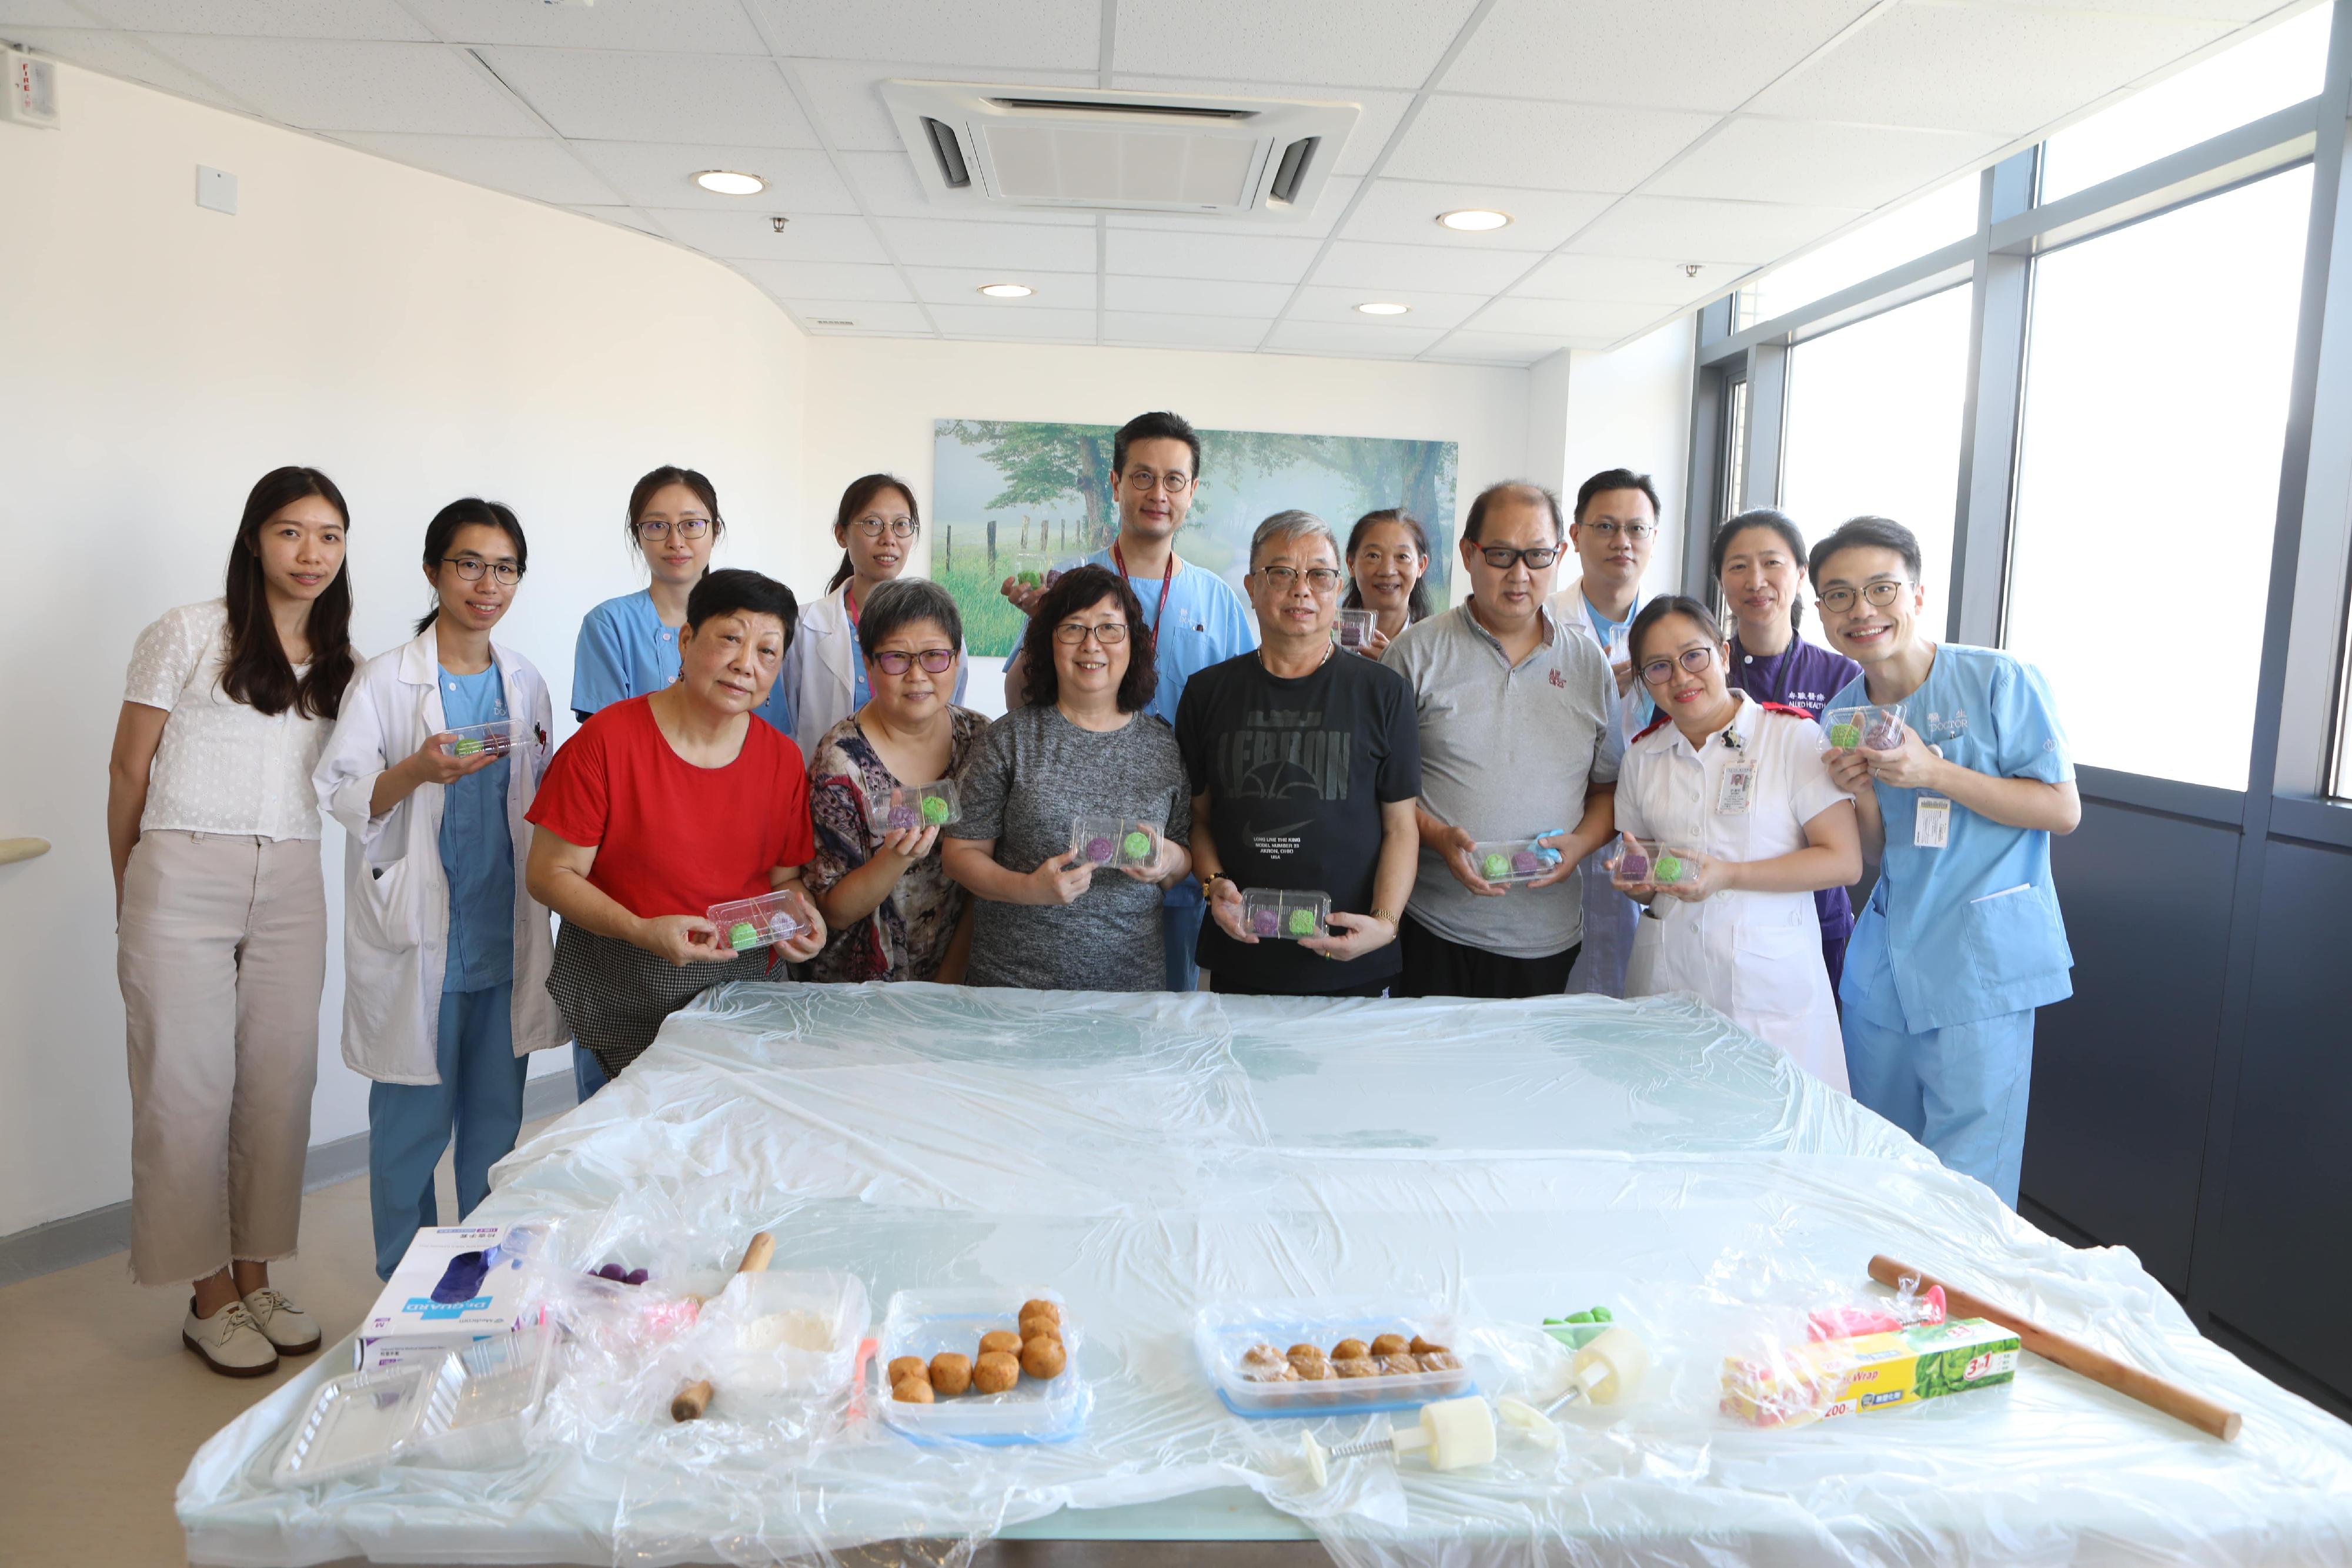 Mid-Autumn Festival celebration activities are arranged by various clusters of the Hospital Authority. Participants of the "Sweet Buddies" patient group  and hospital staff, taste specially made healthy mooncakes to celebrate the festival together. 